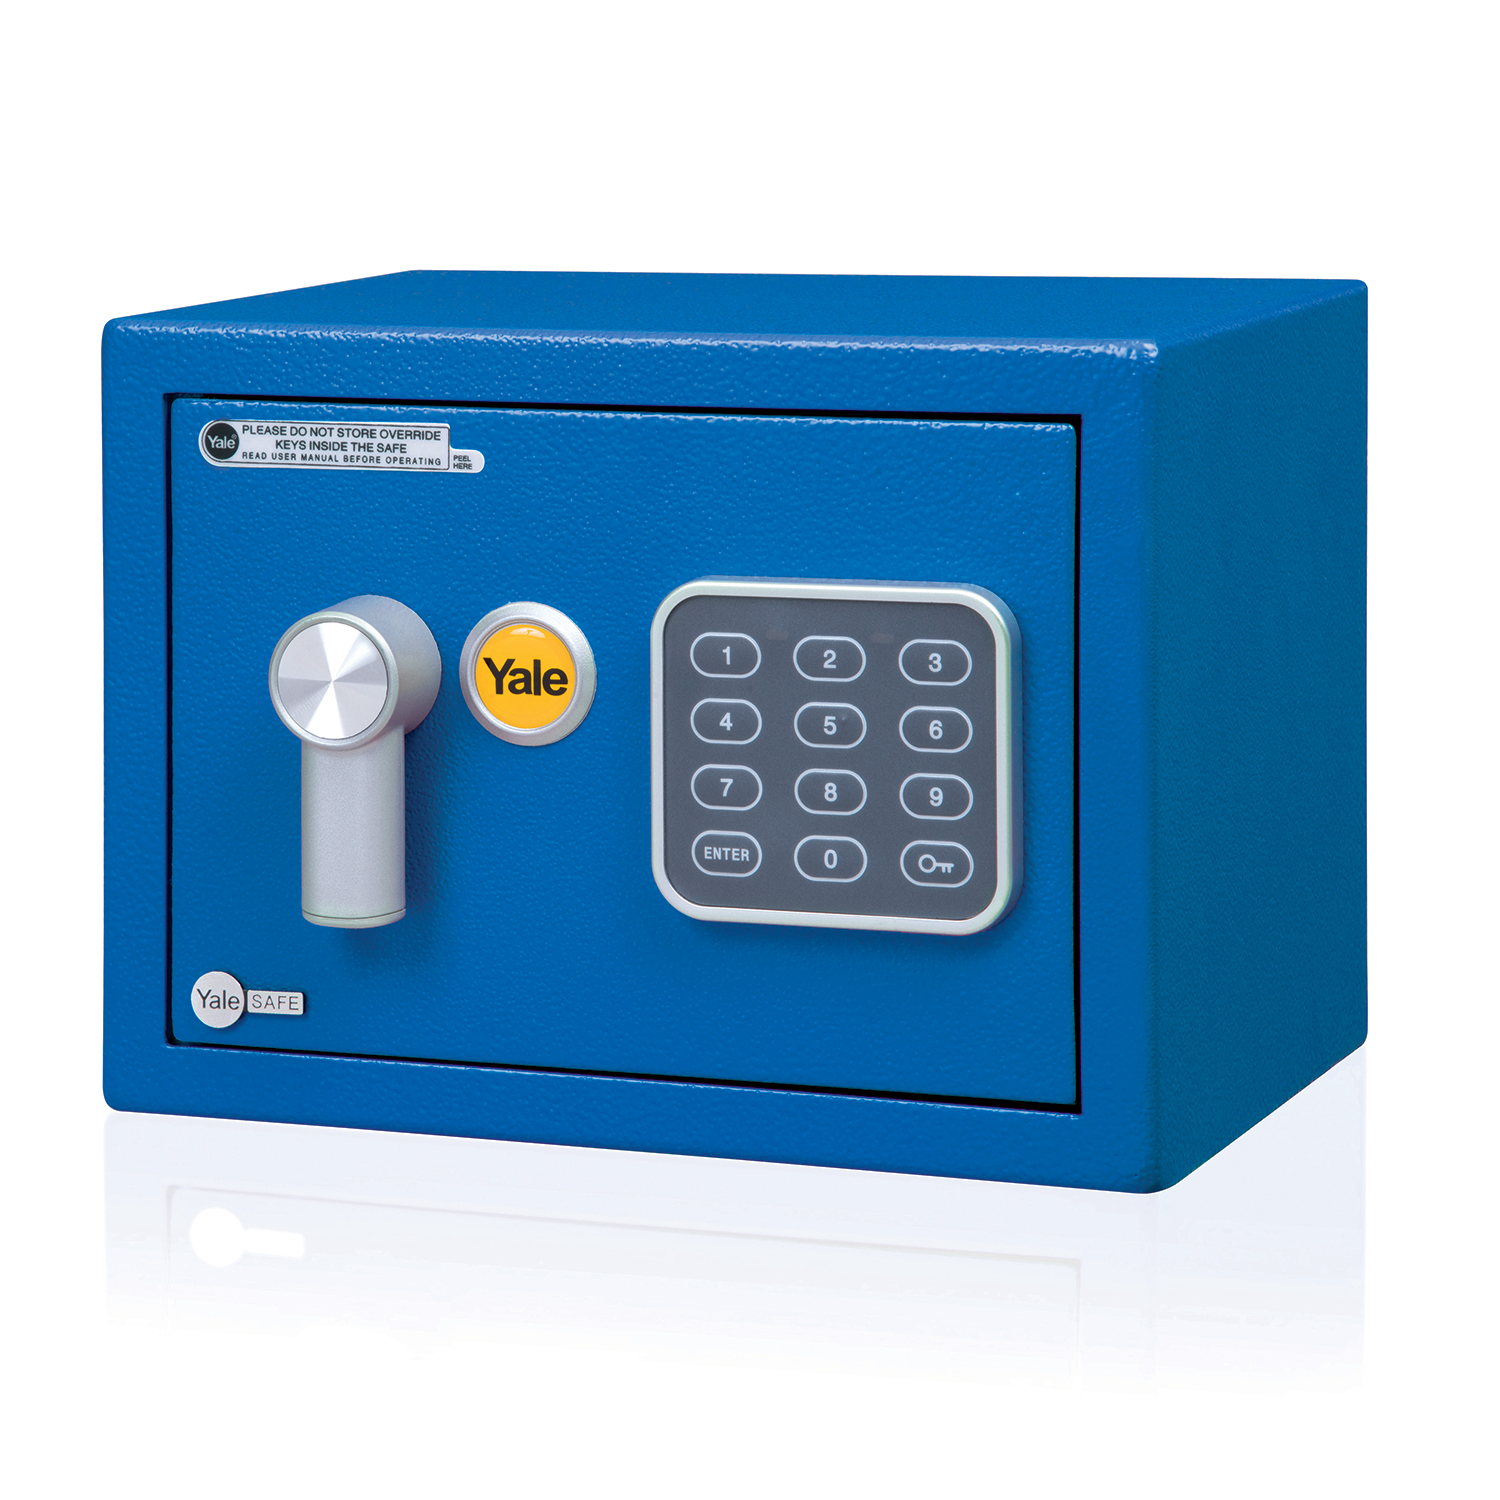 Truest Form Of Security With The Certified Yale Safe Range | YaleHome